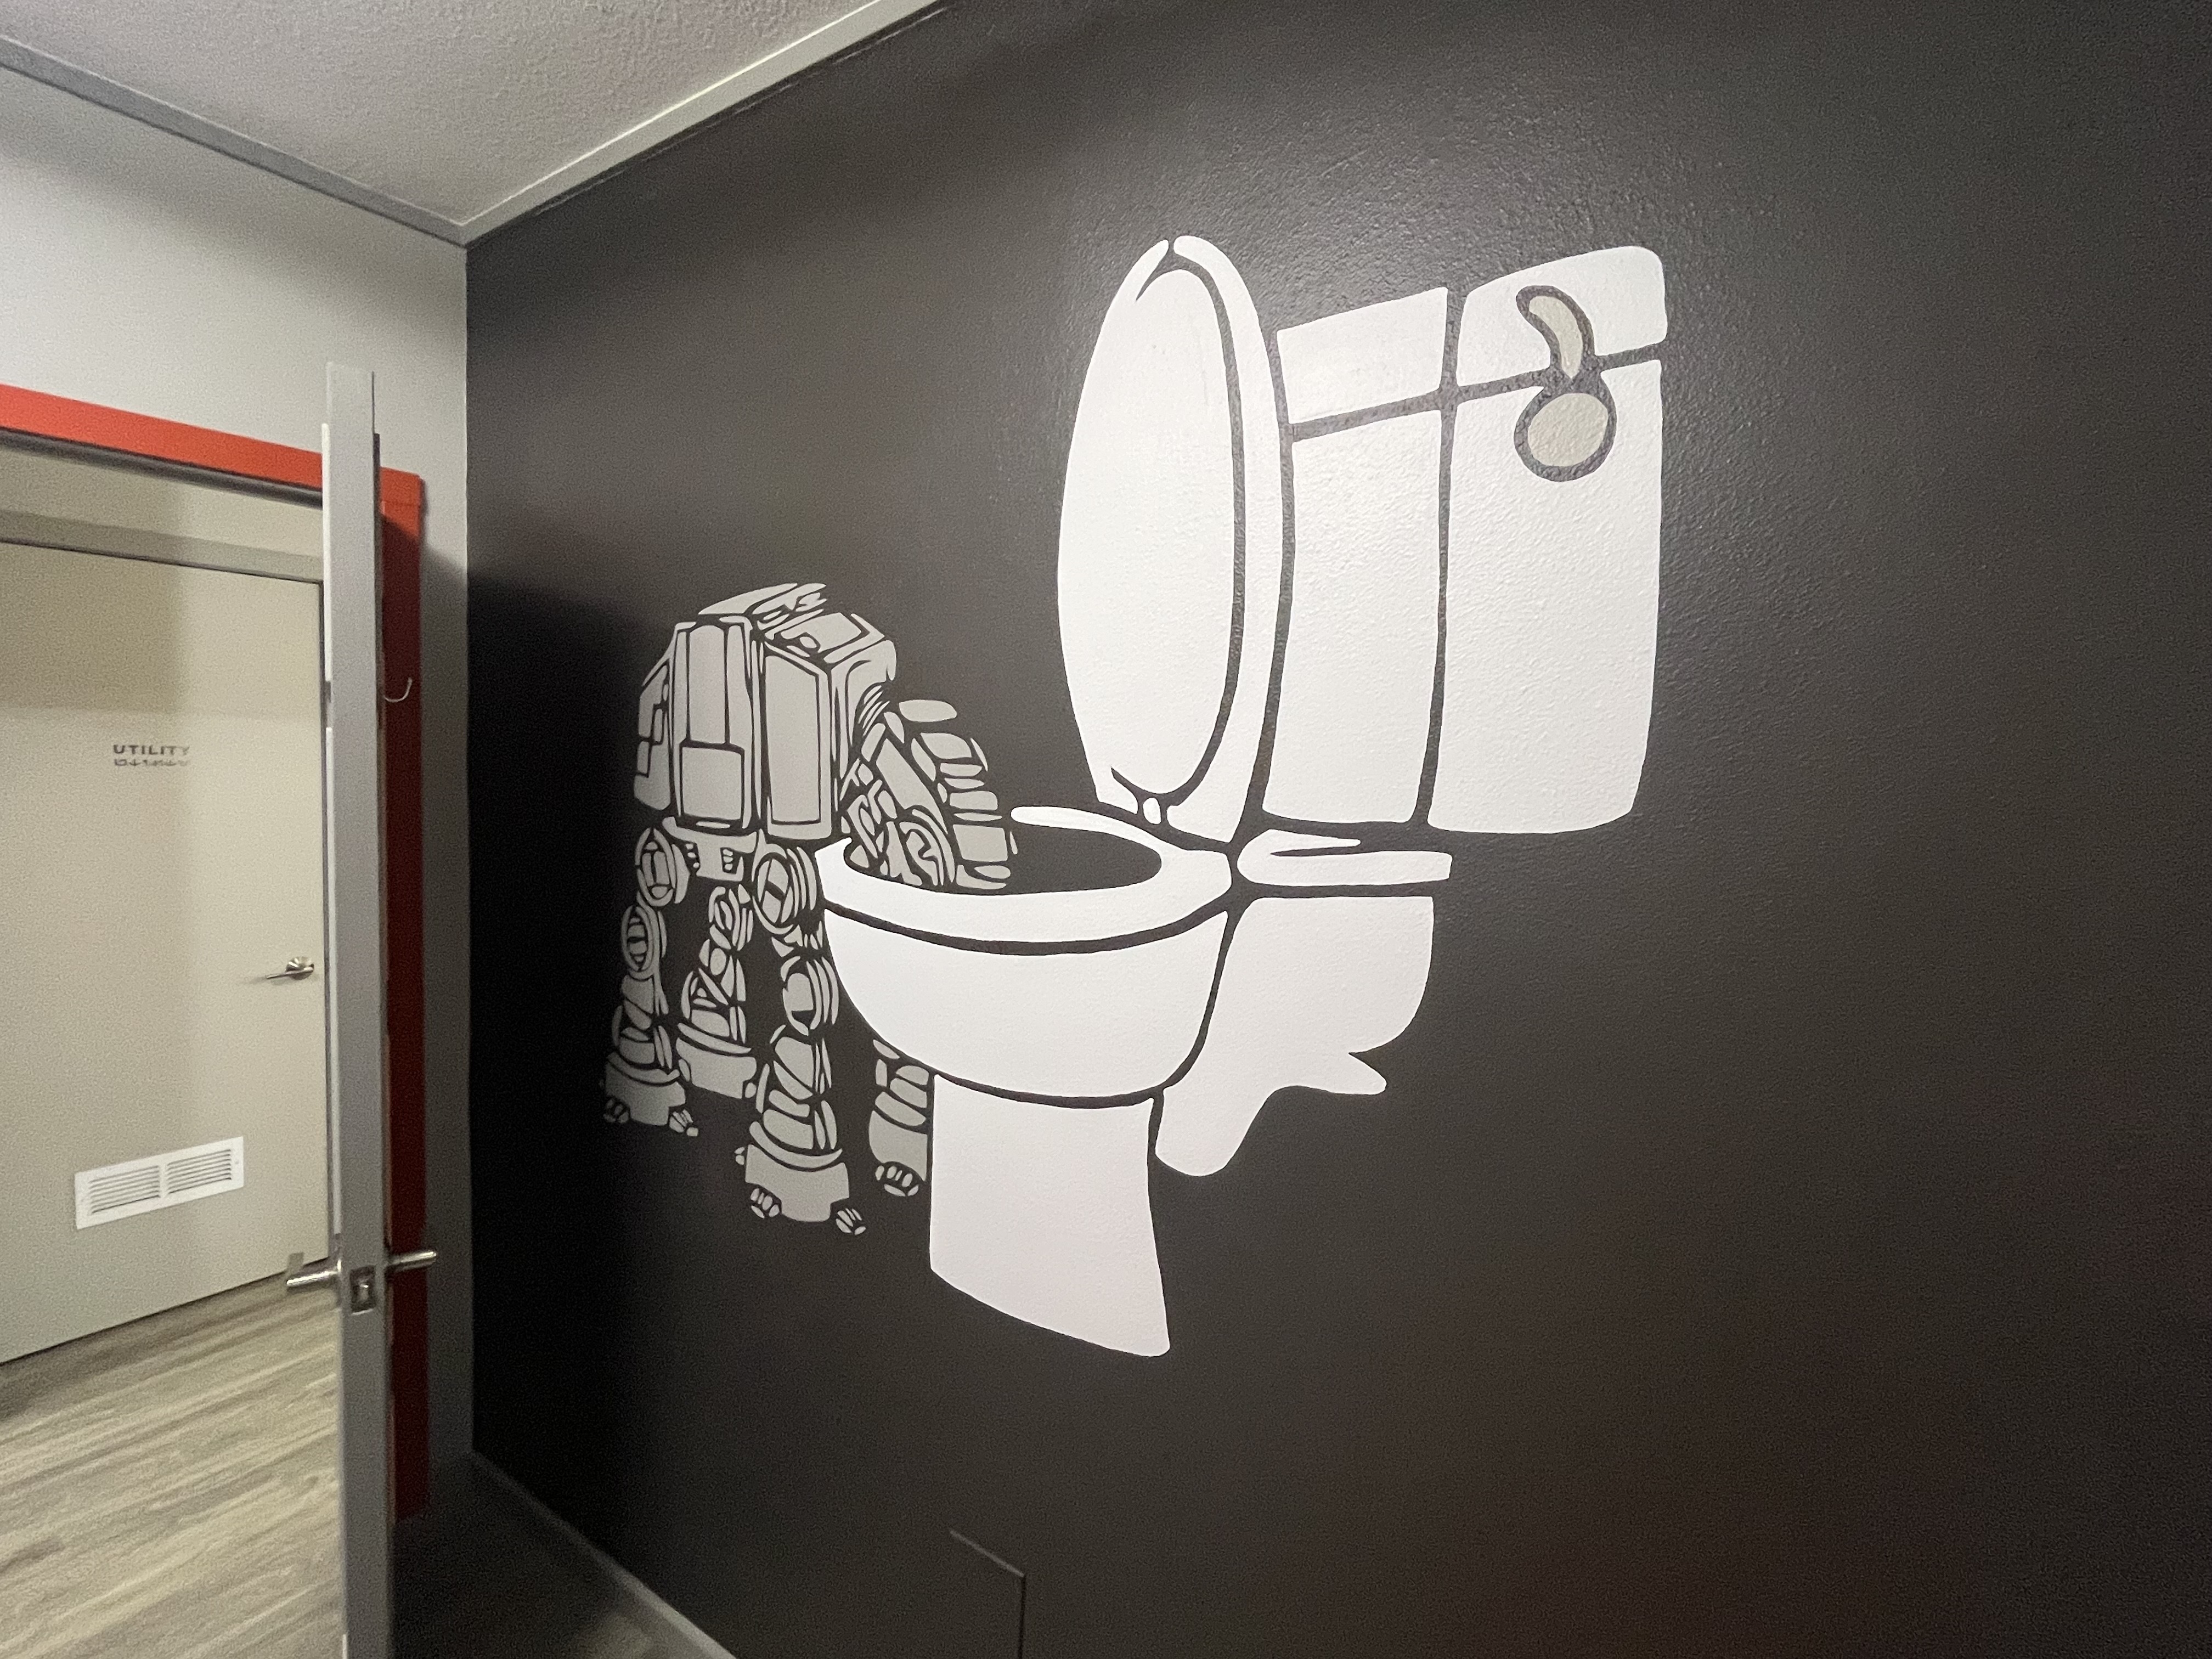 A wall mural of an AT-AT from Star Wars drinking out of the toilet like a dog.